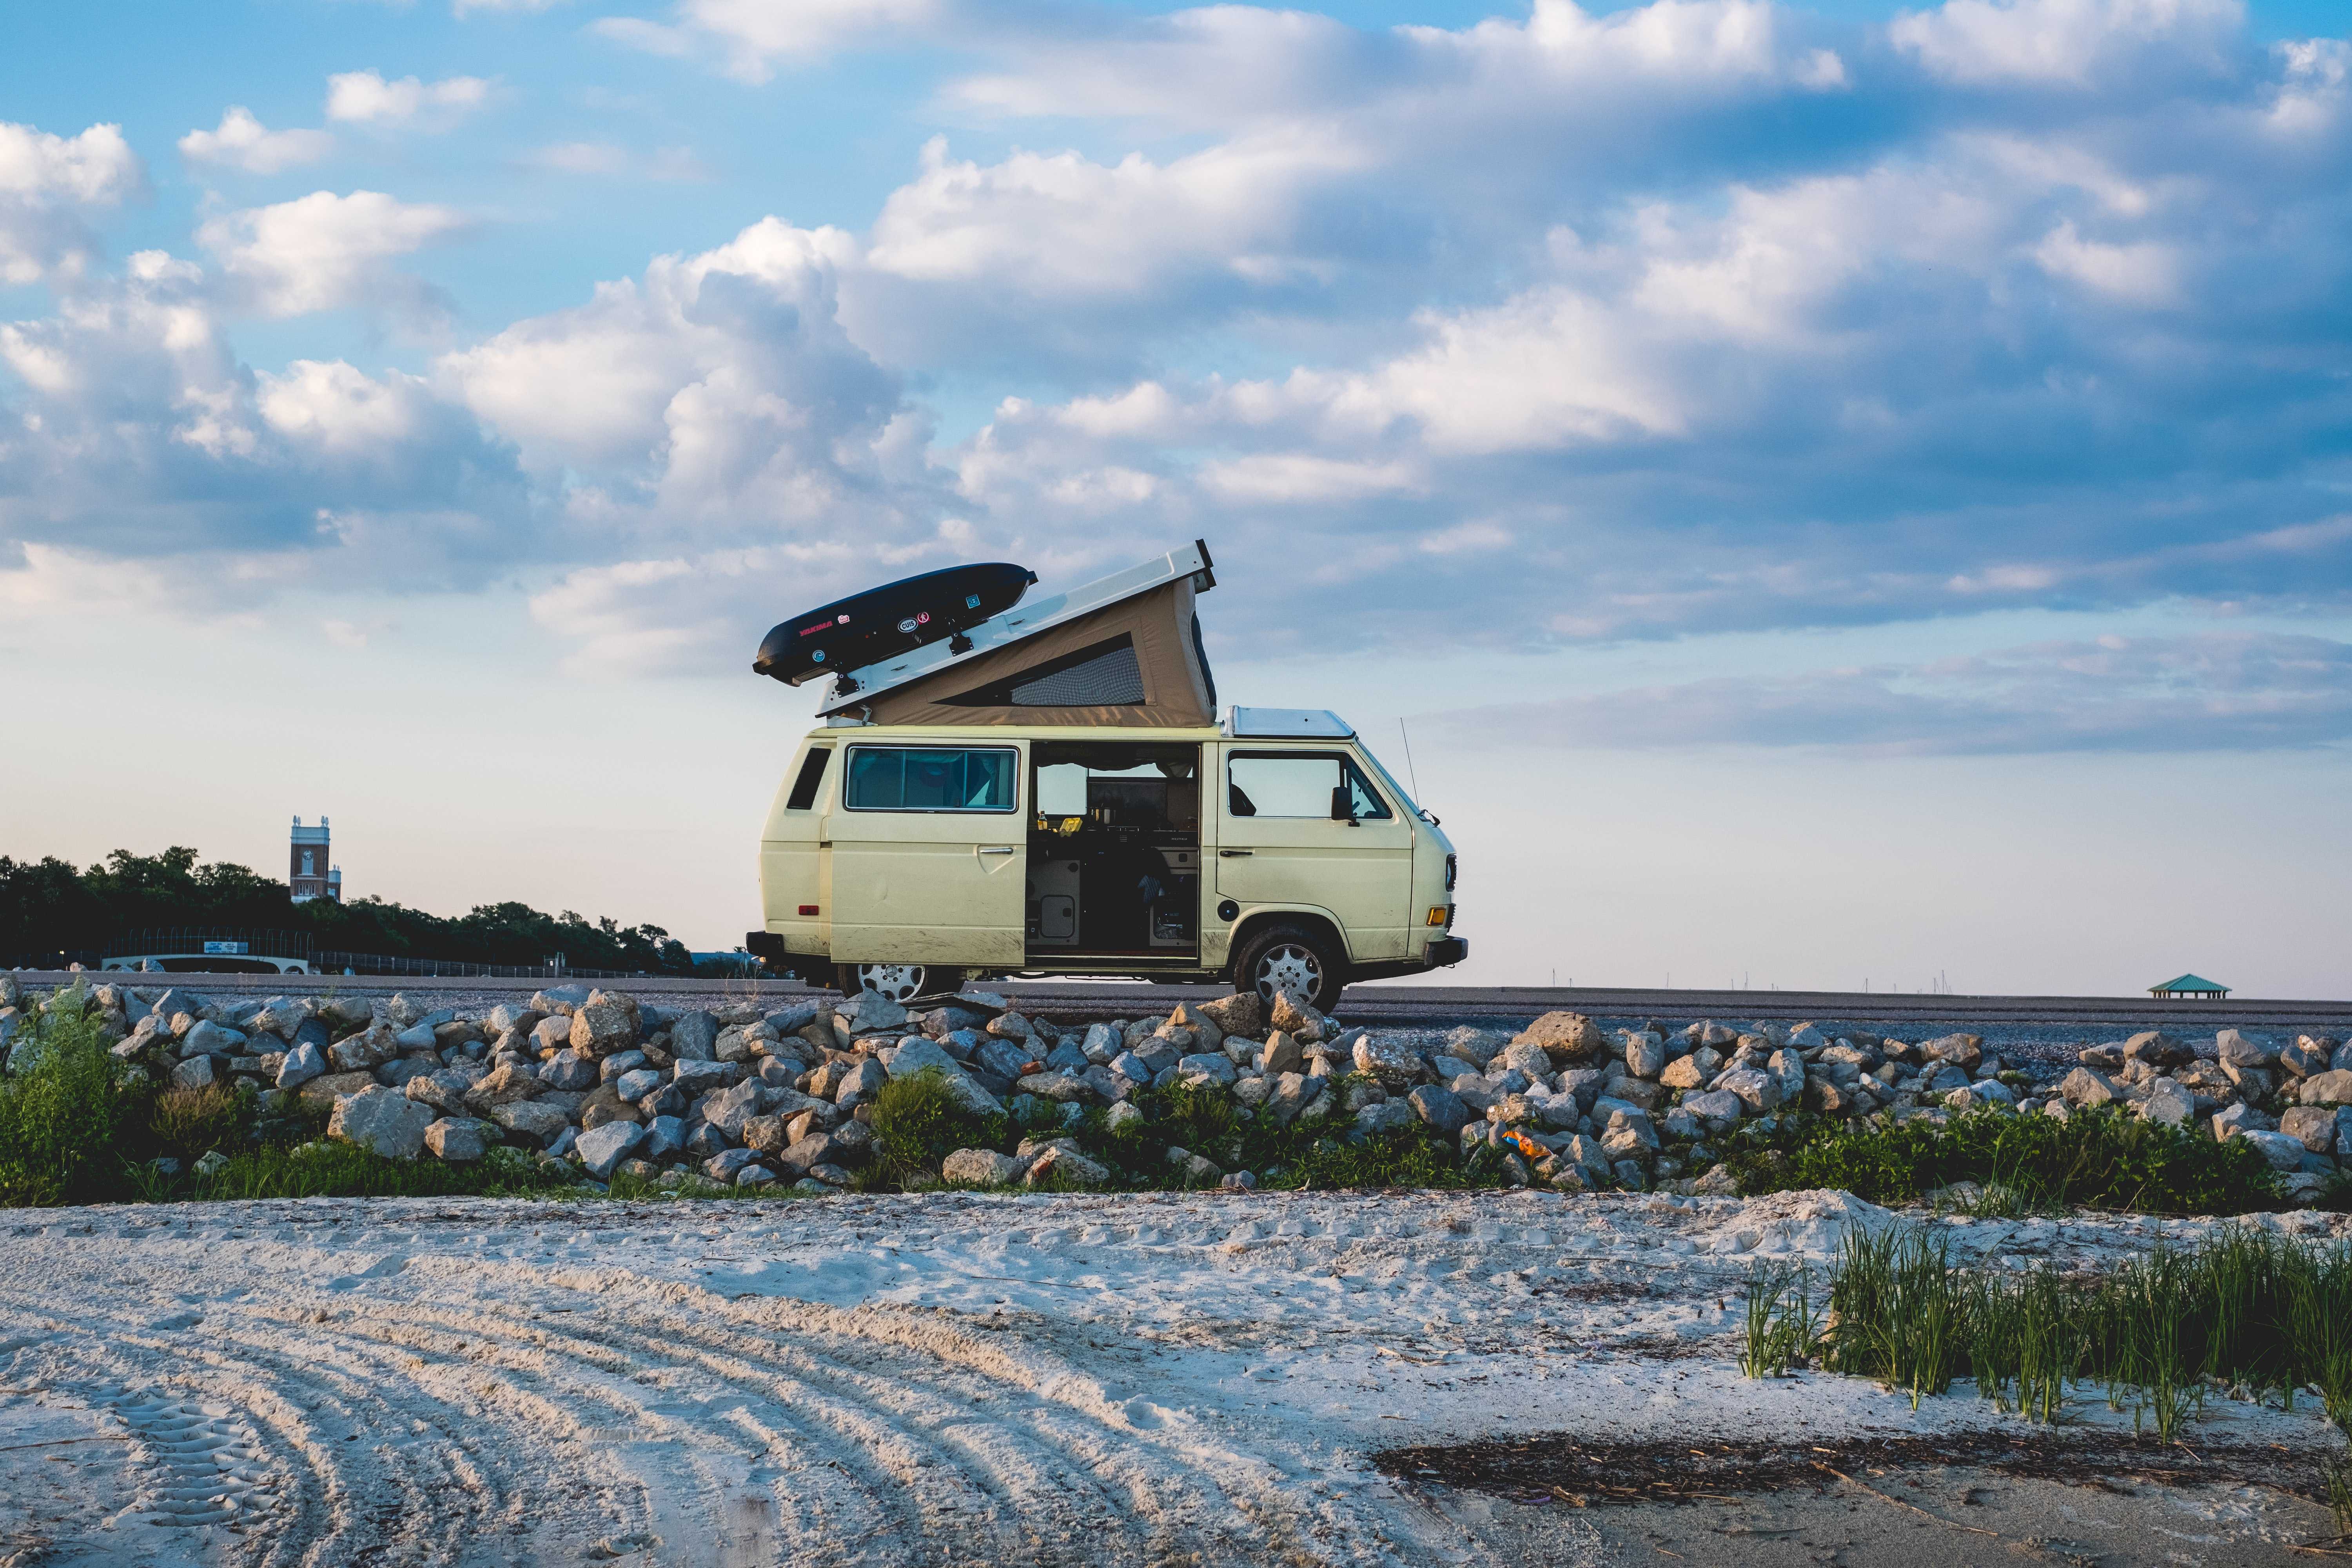 A campervan by the sea